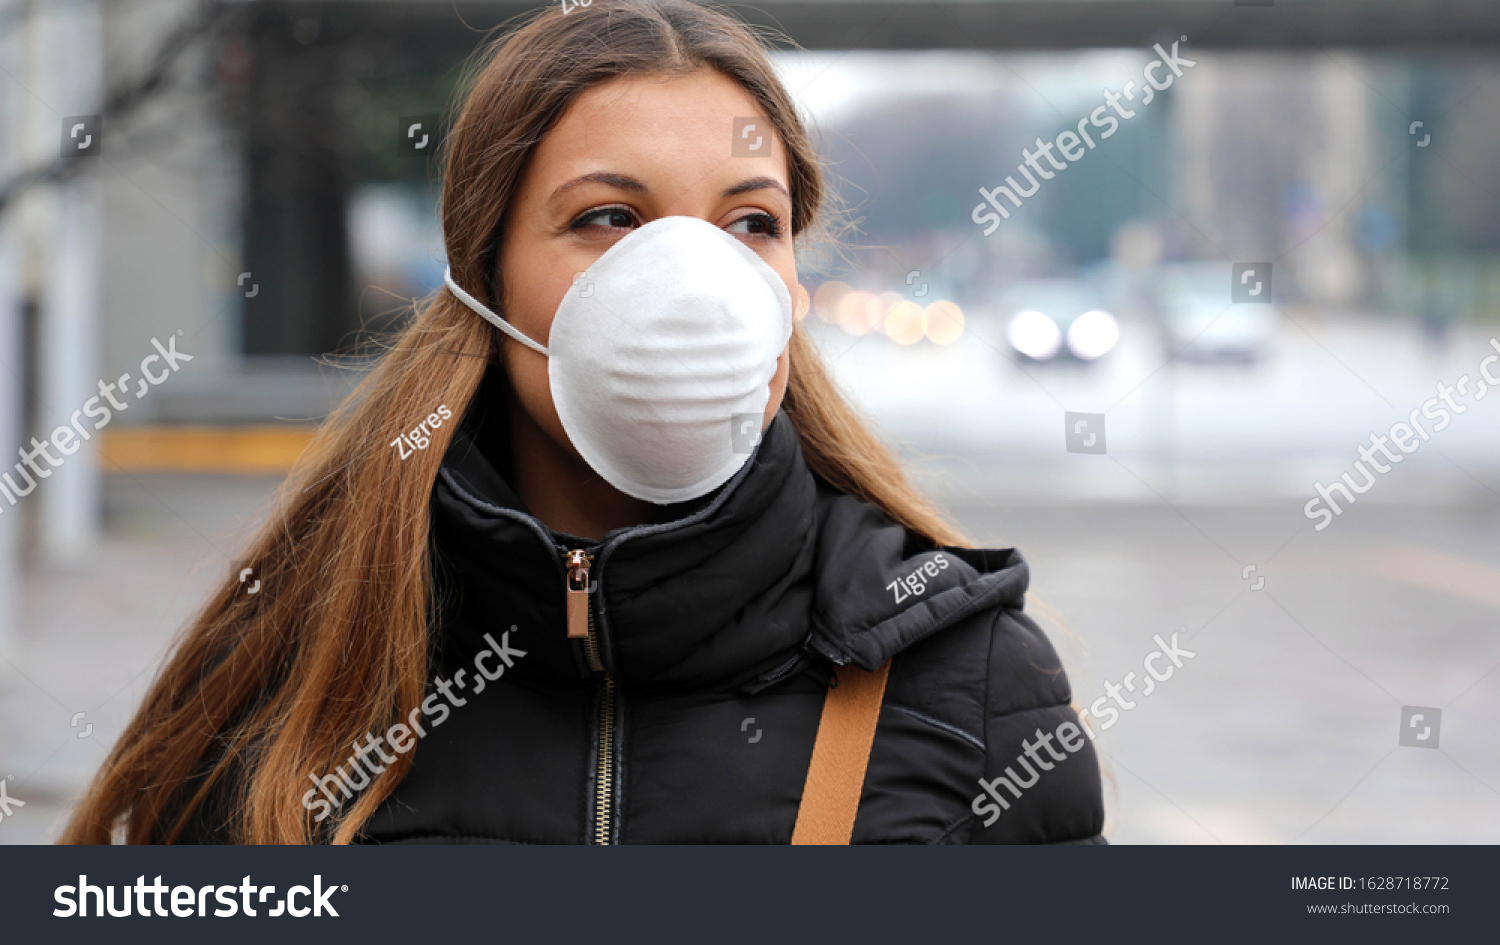 COVID-19 Pandemic Coronavirus Young Girl in city street wearing face mask protective for spreading of Coronavirus Disease 2019. Close up of young woman with protective mask on face against SARS-CoV-2. #1628718772